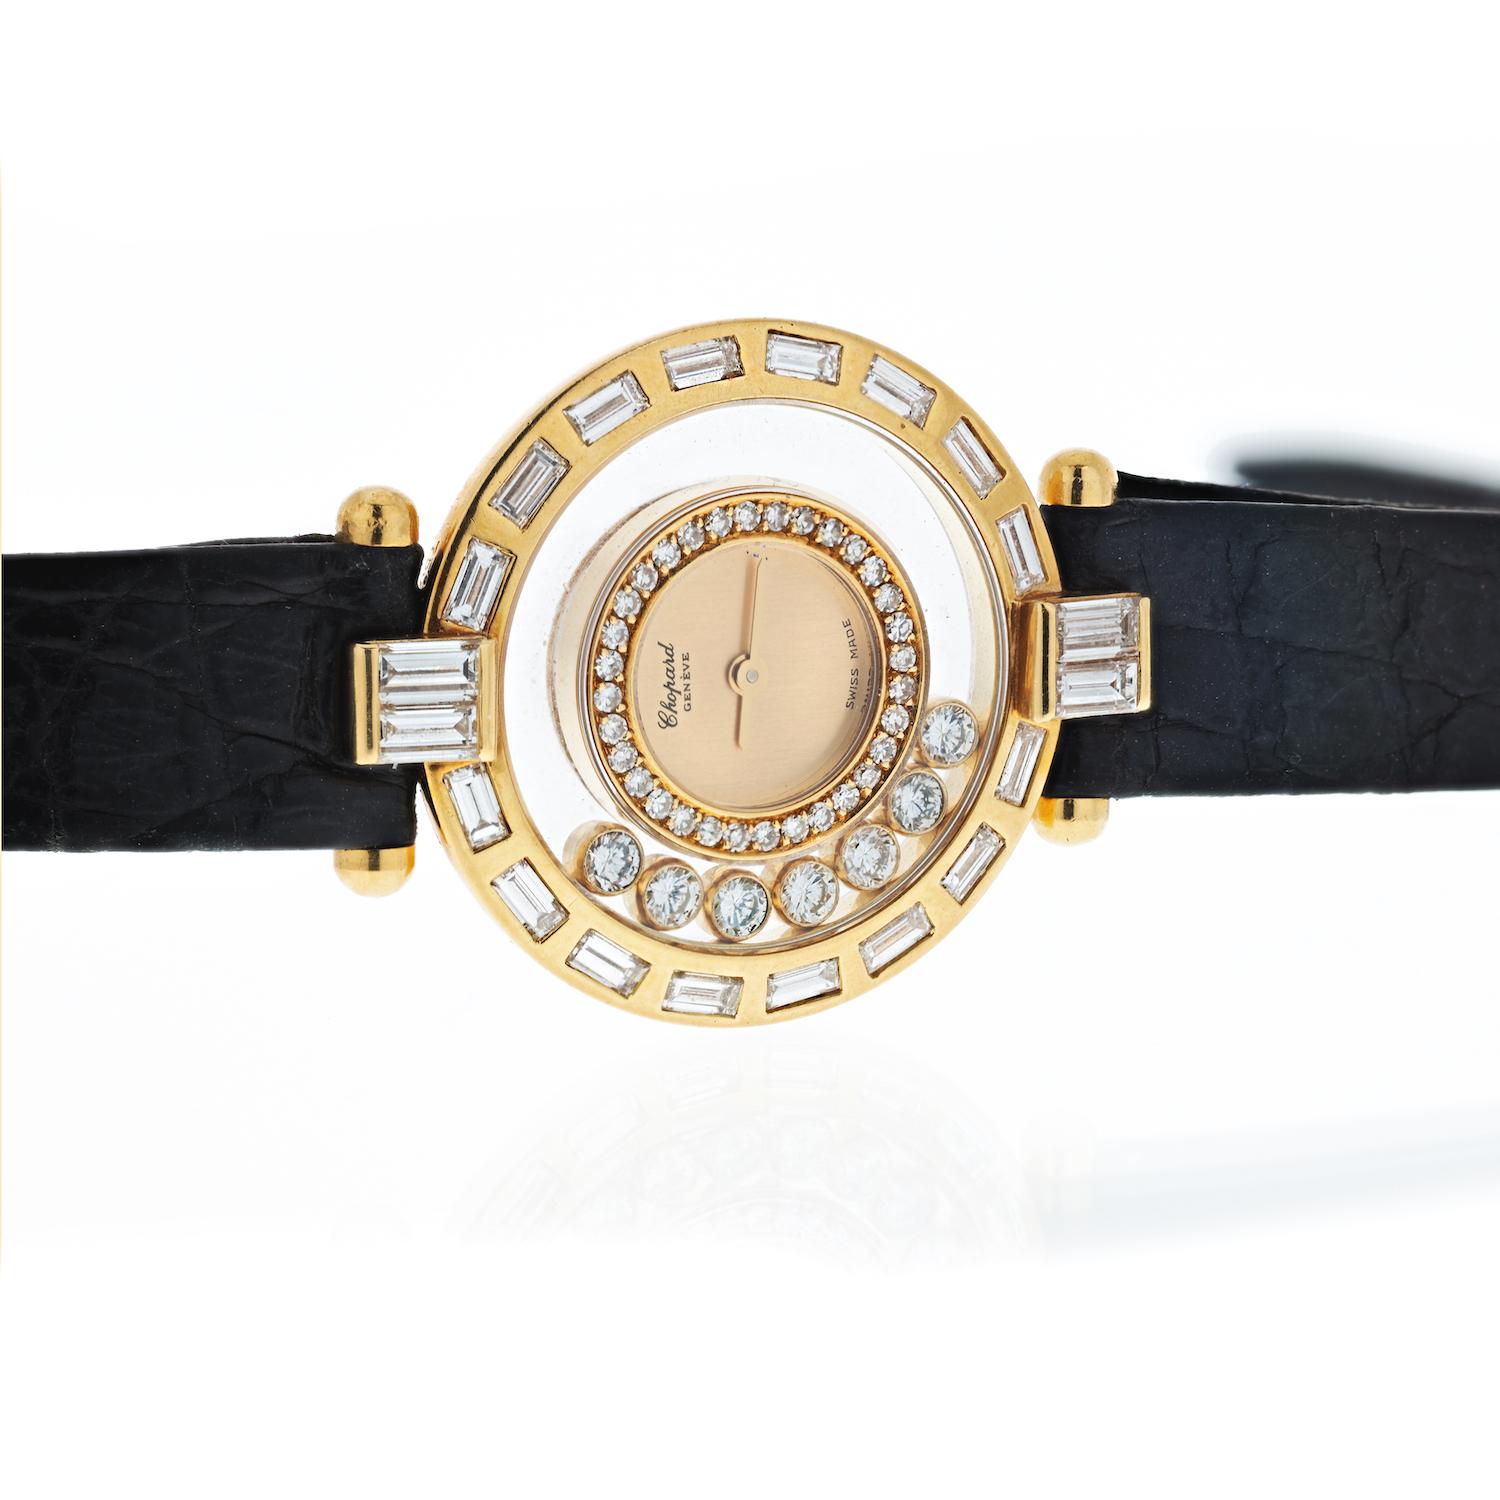 Chopard Yellow Gold Diamond Watch.
On A leather strap. Strap shows wear but not too much.
Case and crystal are in perfect condition. No scratches. 
Diamonds are all original and are in perfect condition. No scratches.
The watch case is rather thin